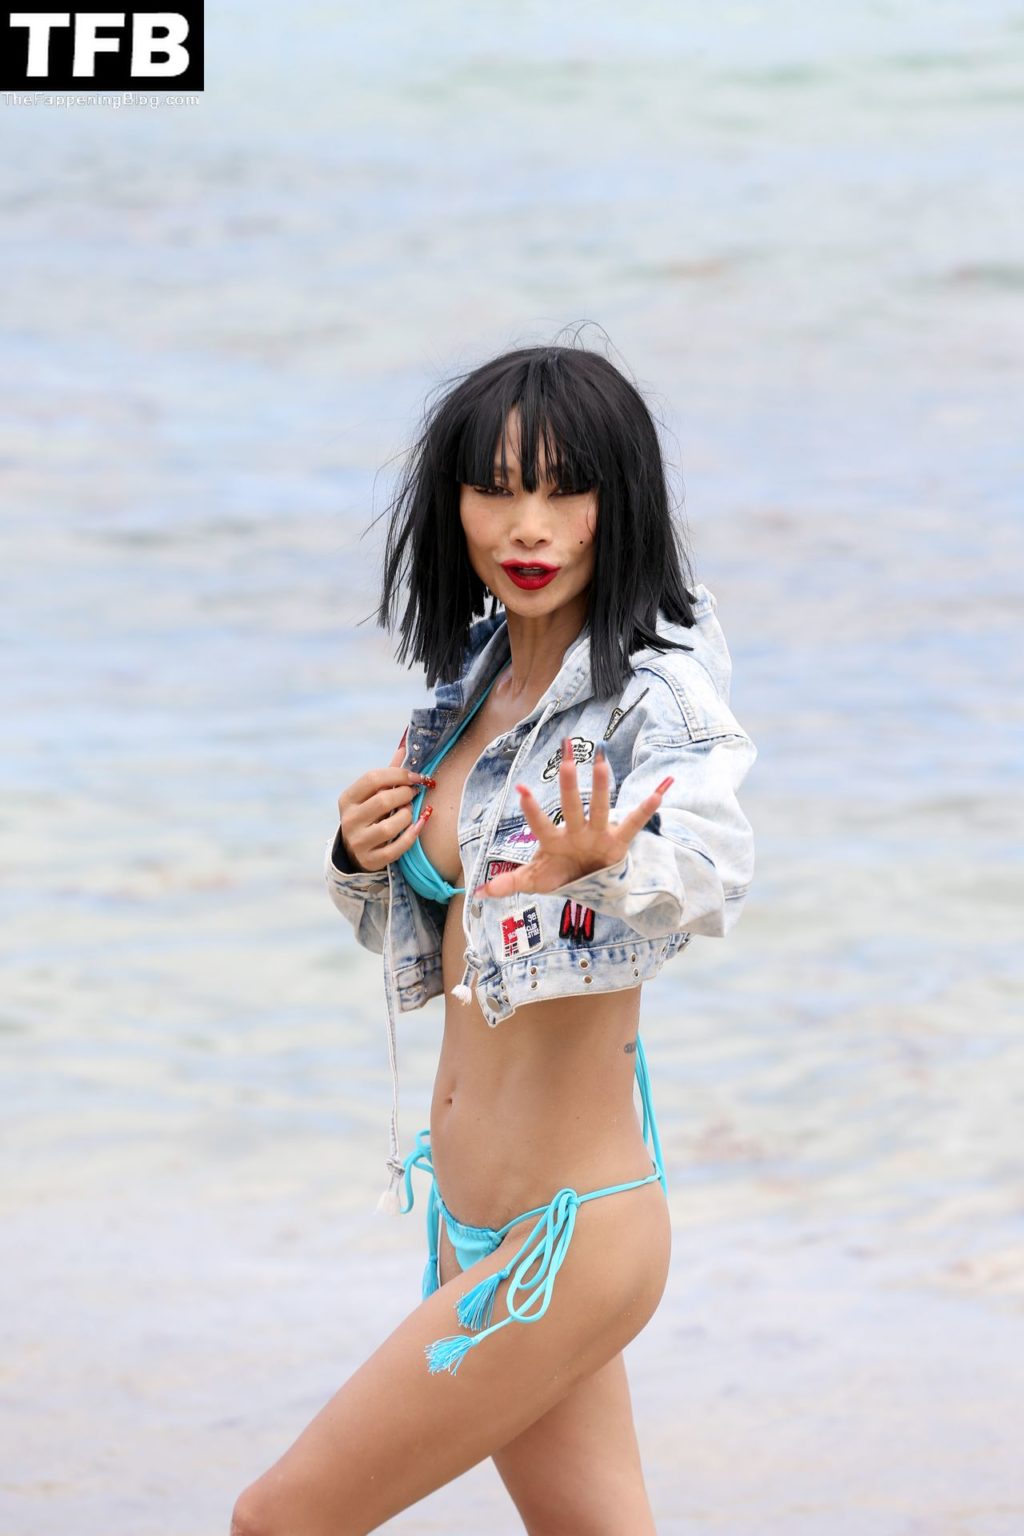 Bai Ling Looks Hot and Fit at the Beach in Florida (121 Photos)